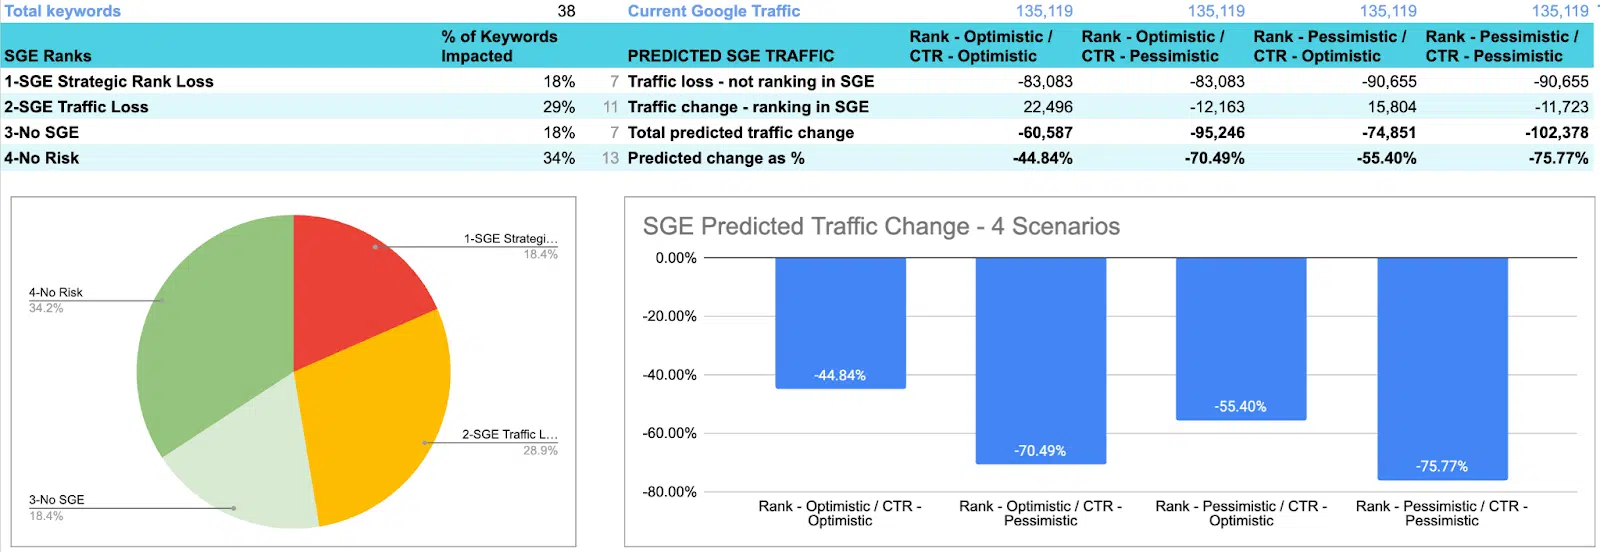 It’s possible to estimate how much traffic you’ll lose or gain from Google SGE